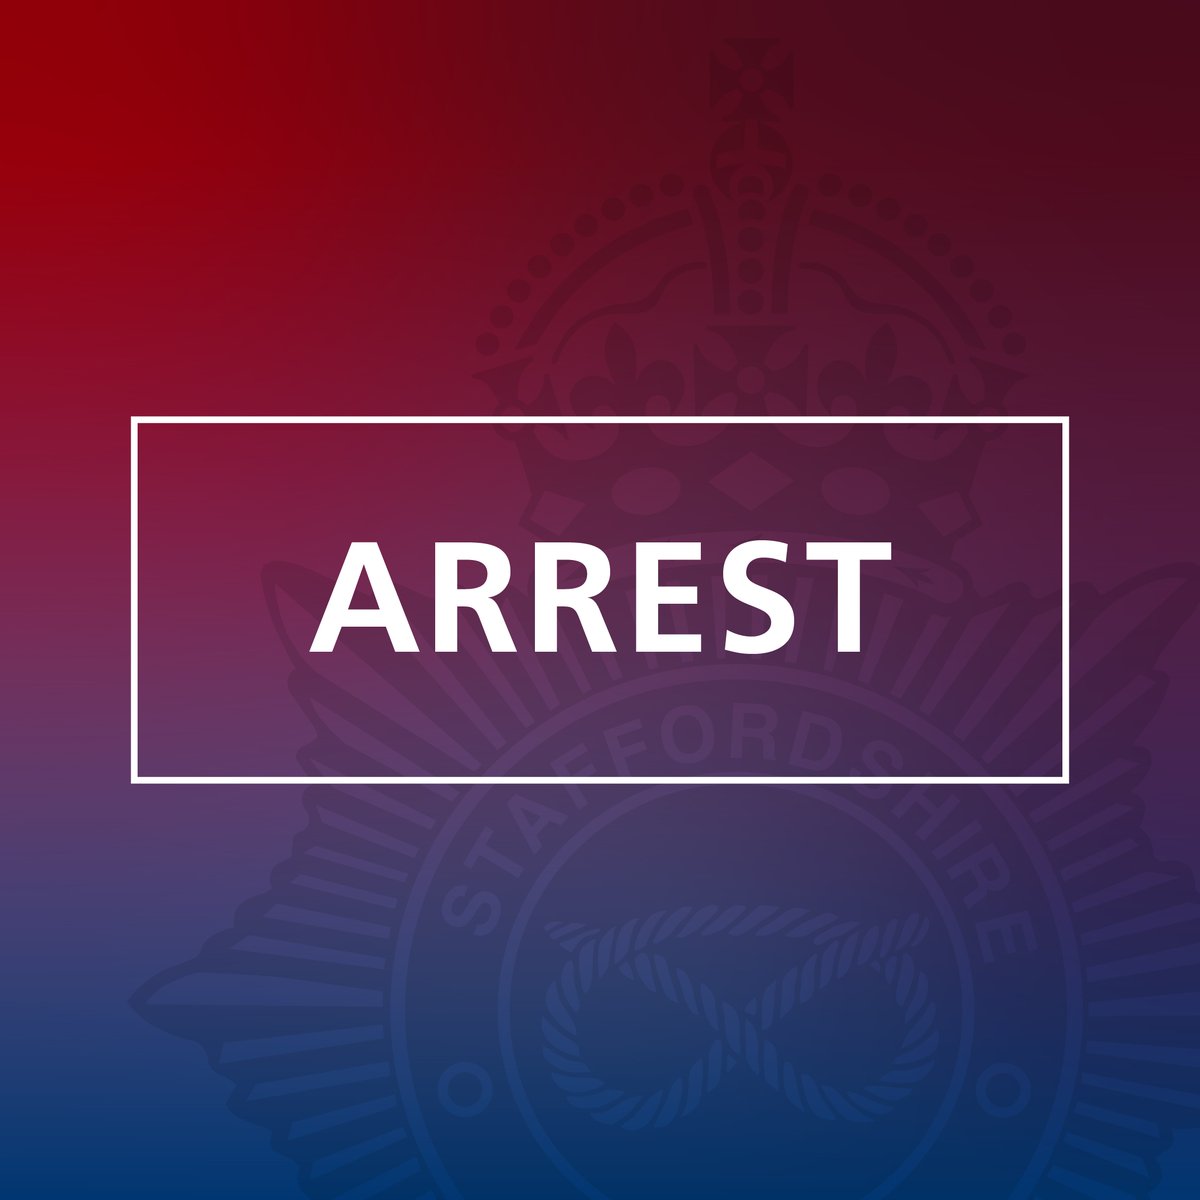 Two teenagers have been arrested after we seized drugs and an imitation firearm in Uttoxeter. Read more: orlo.uk/3XyCl